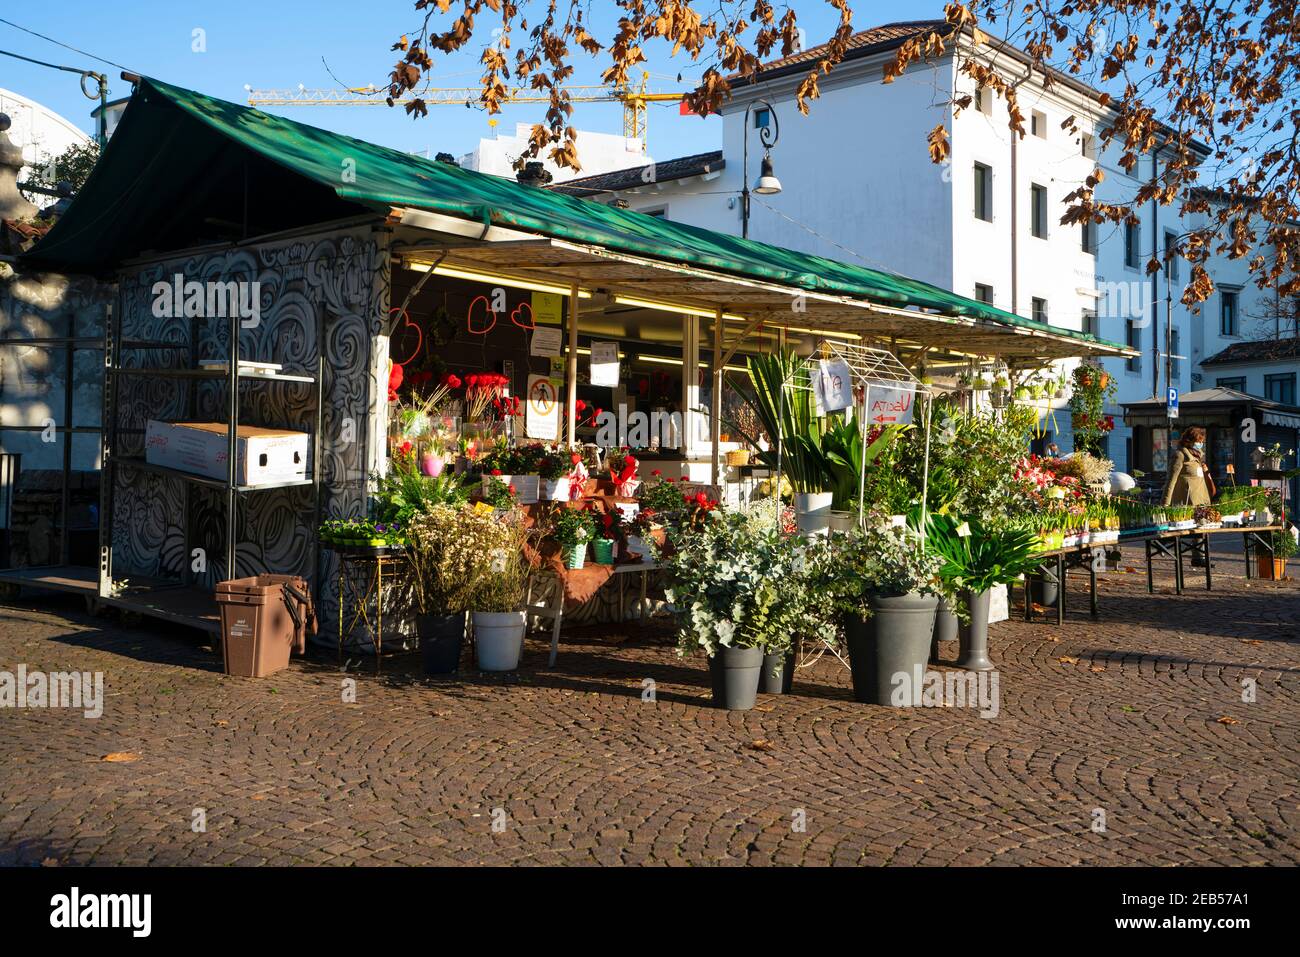 Udine, Italy. February 11, 2020. a flower shop in a square in the city center Stock Photo